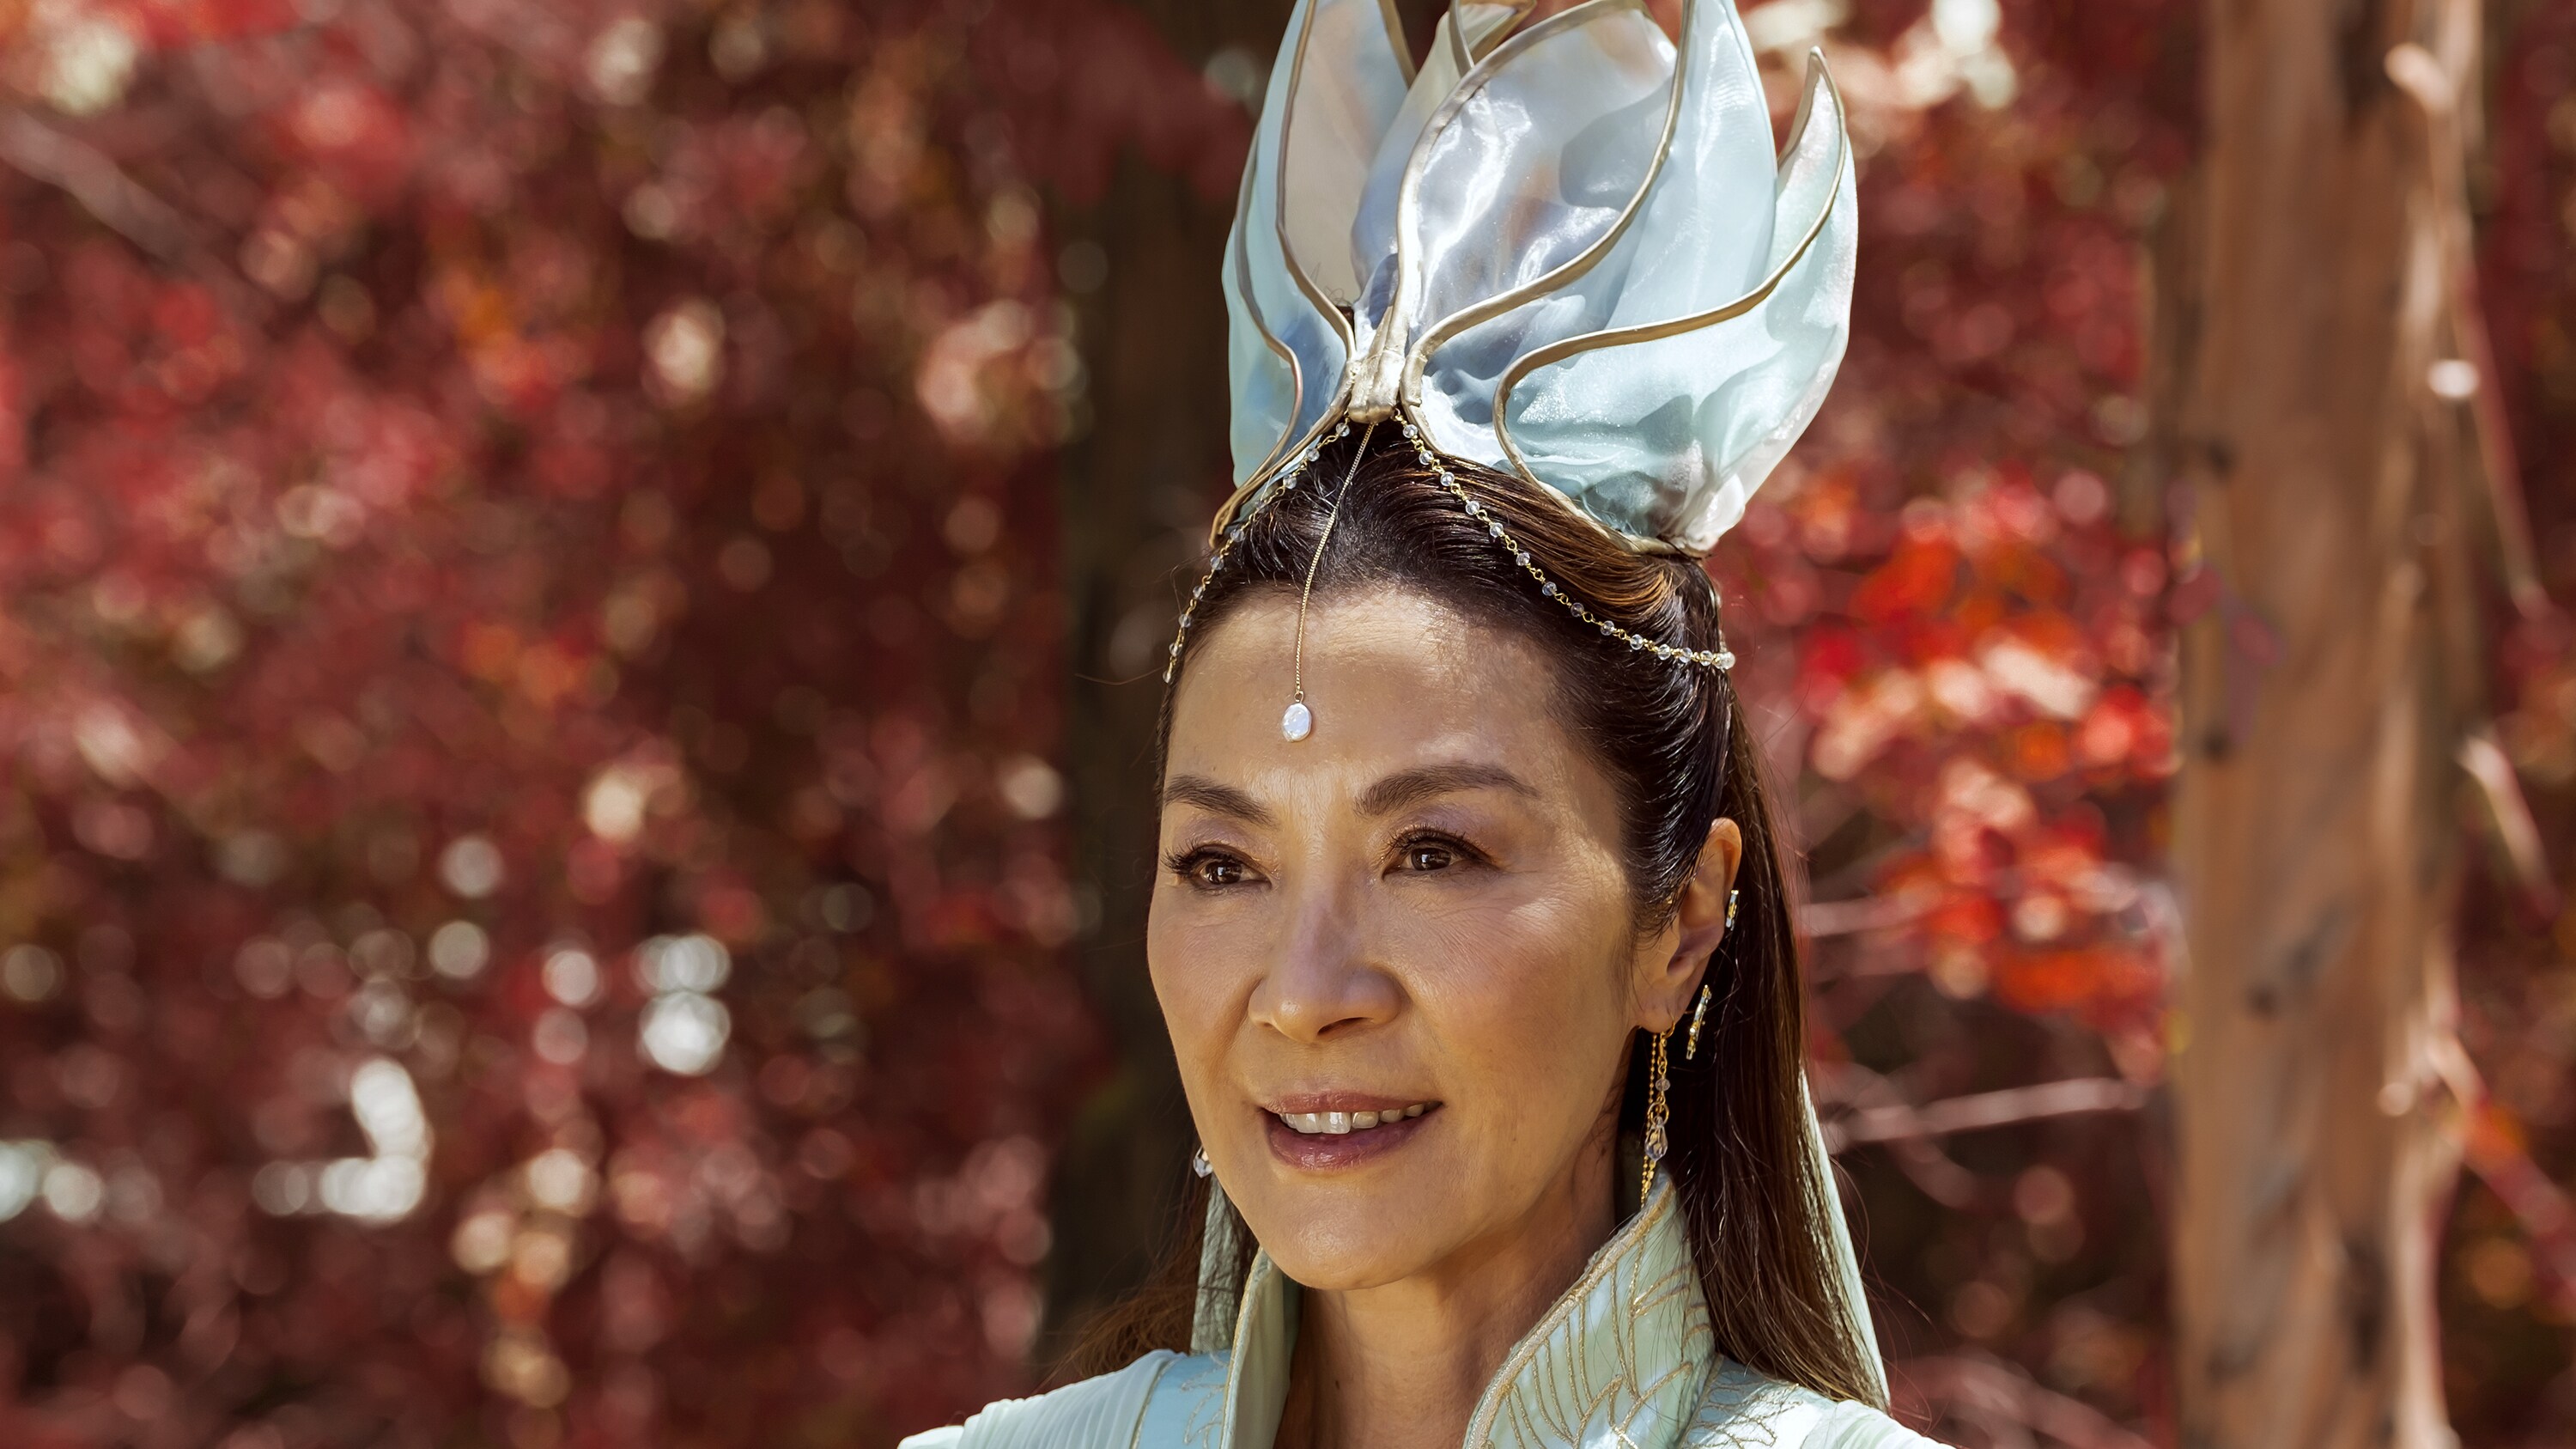 AMERICAN BORN CHINESE - “A Monkey on a Quest” (Disney/Carlos Lopez-Calleja) MICHELLE YEOH